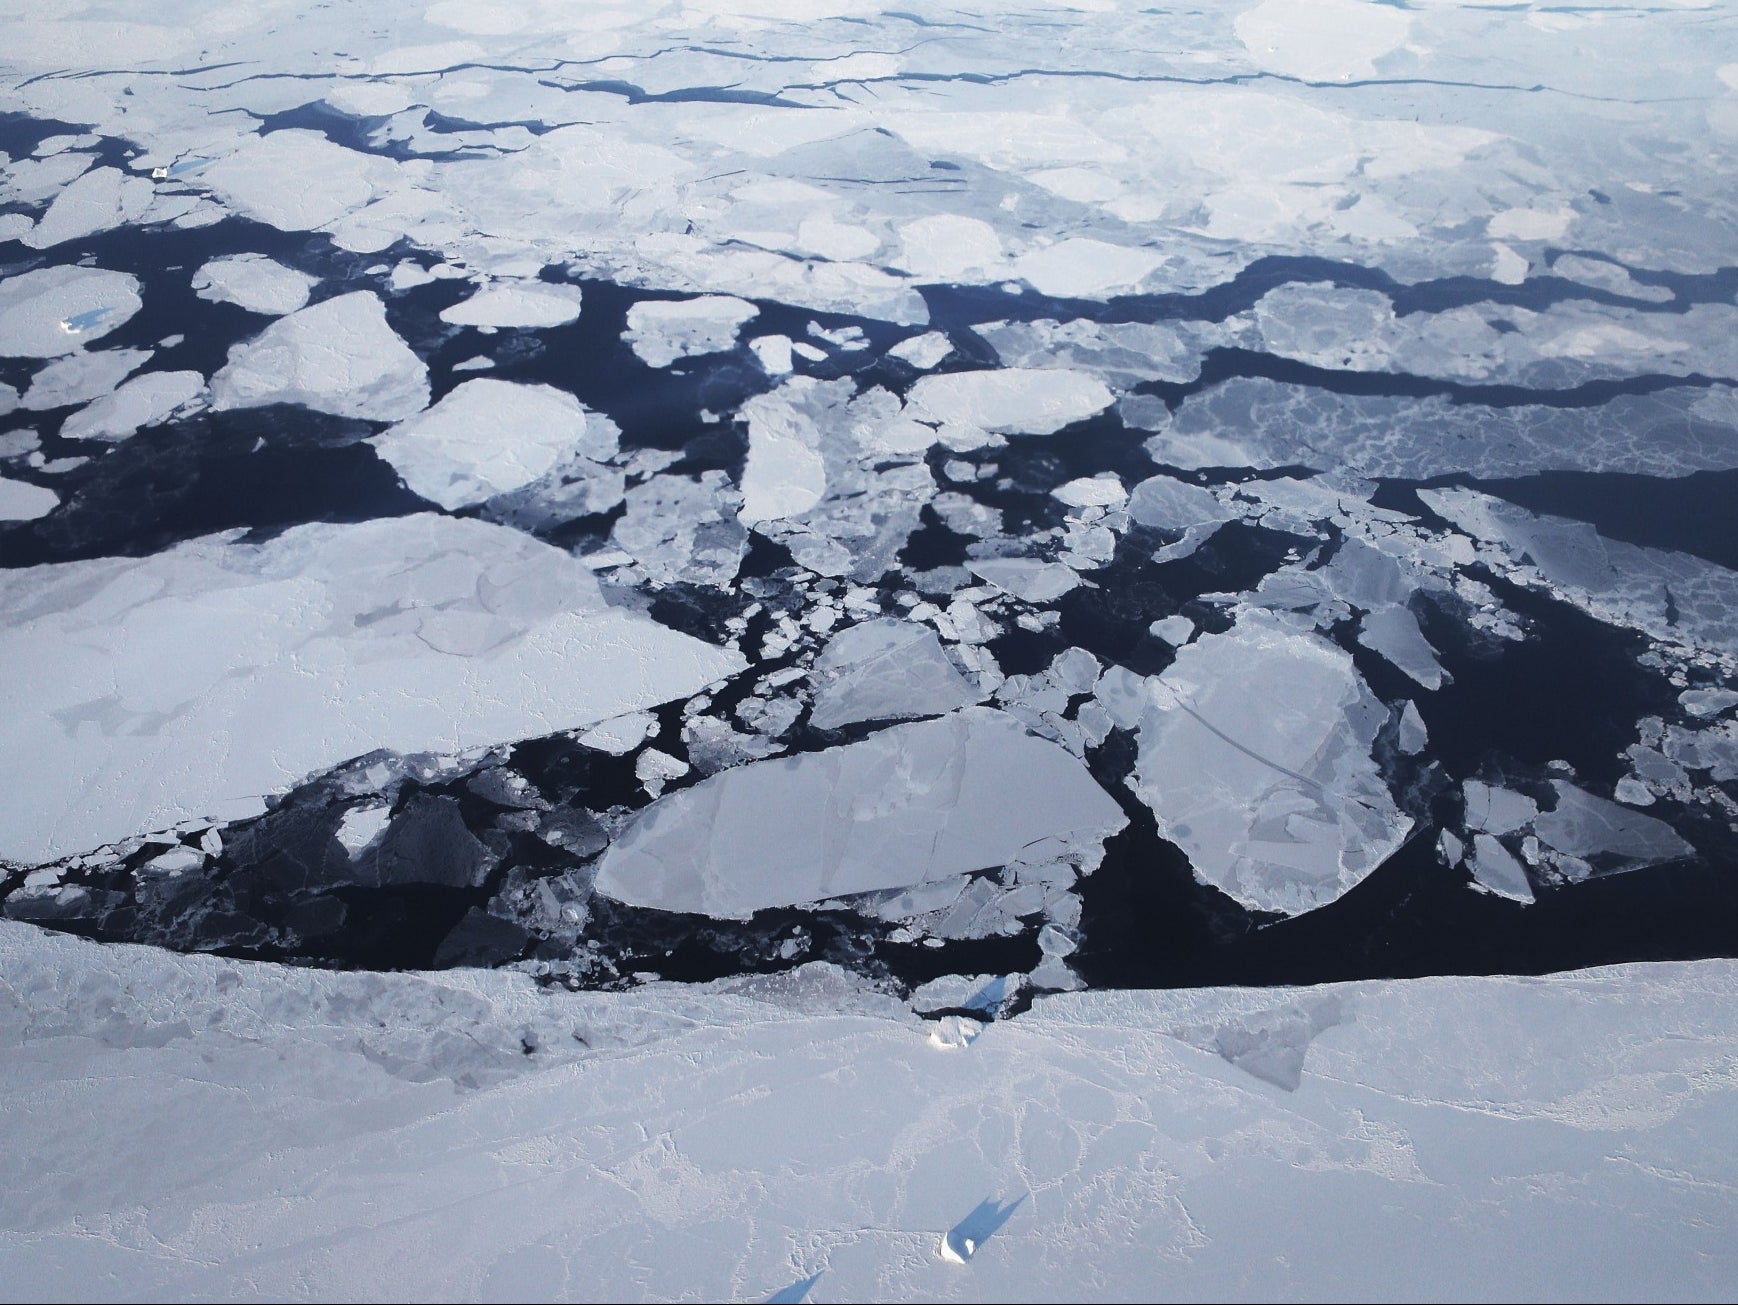 Computer models project the summer sea ice will regularly be below 1 million sq km later this century